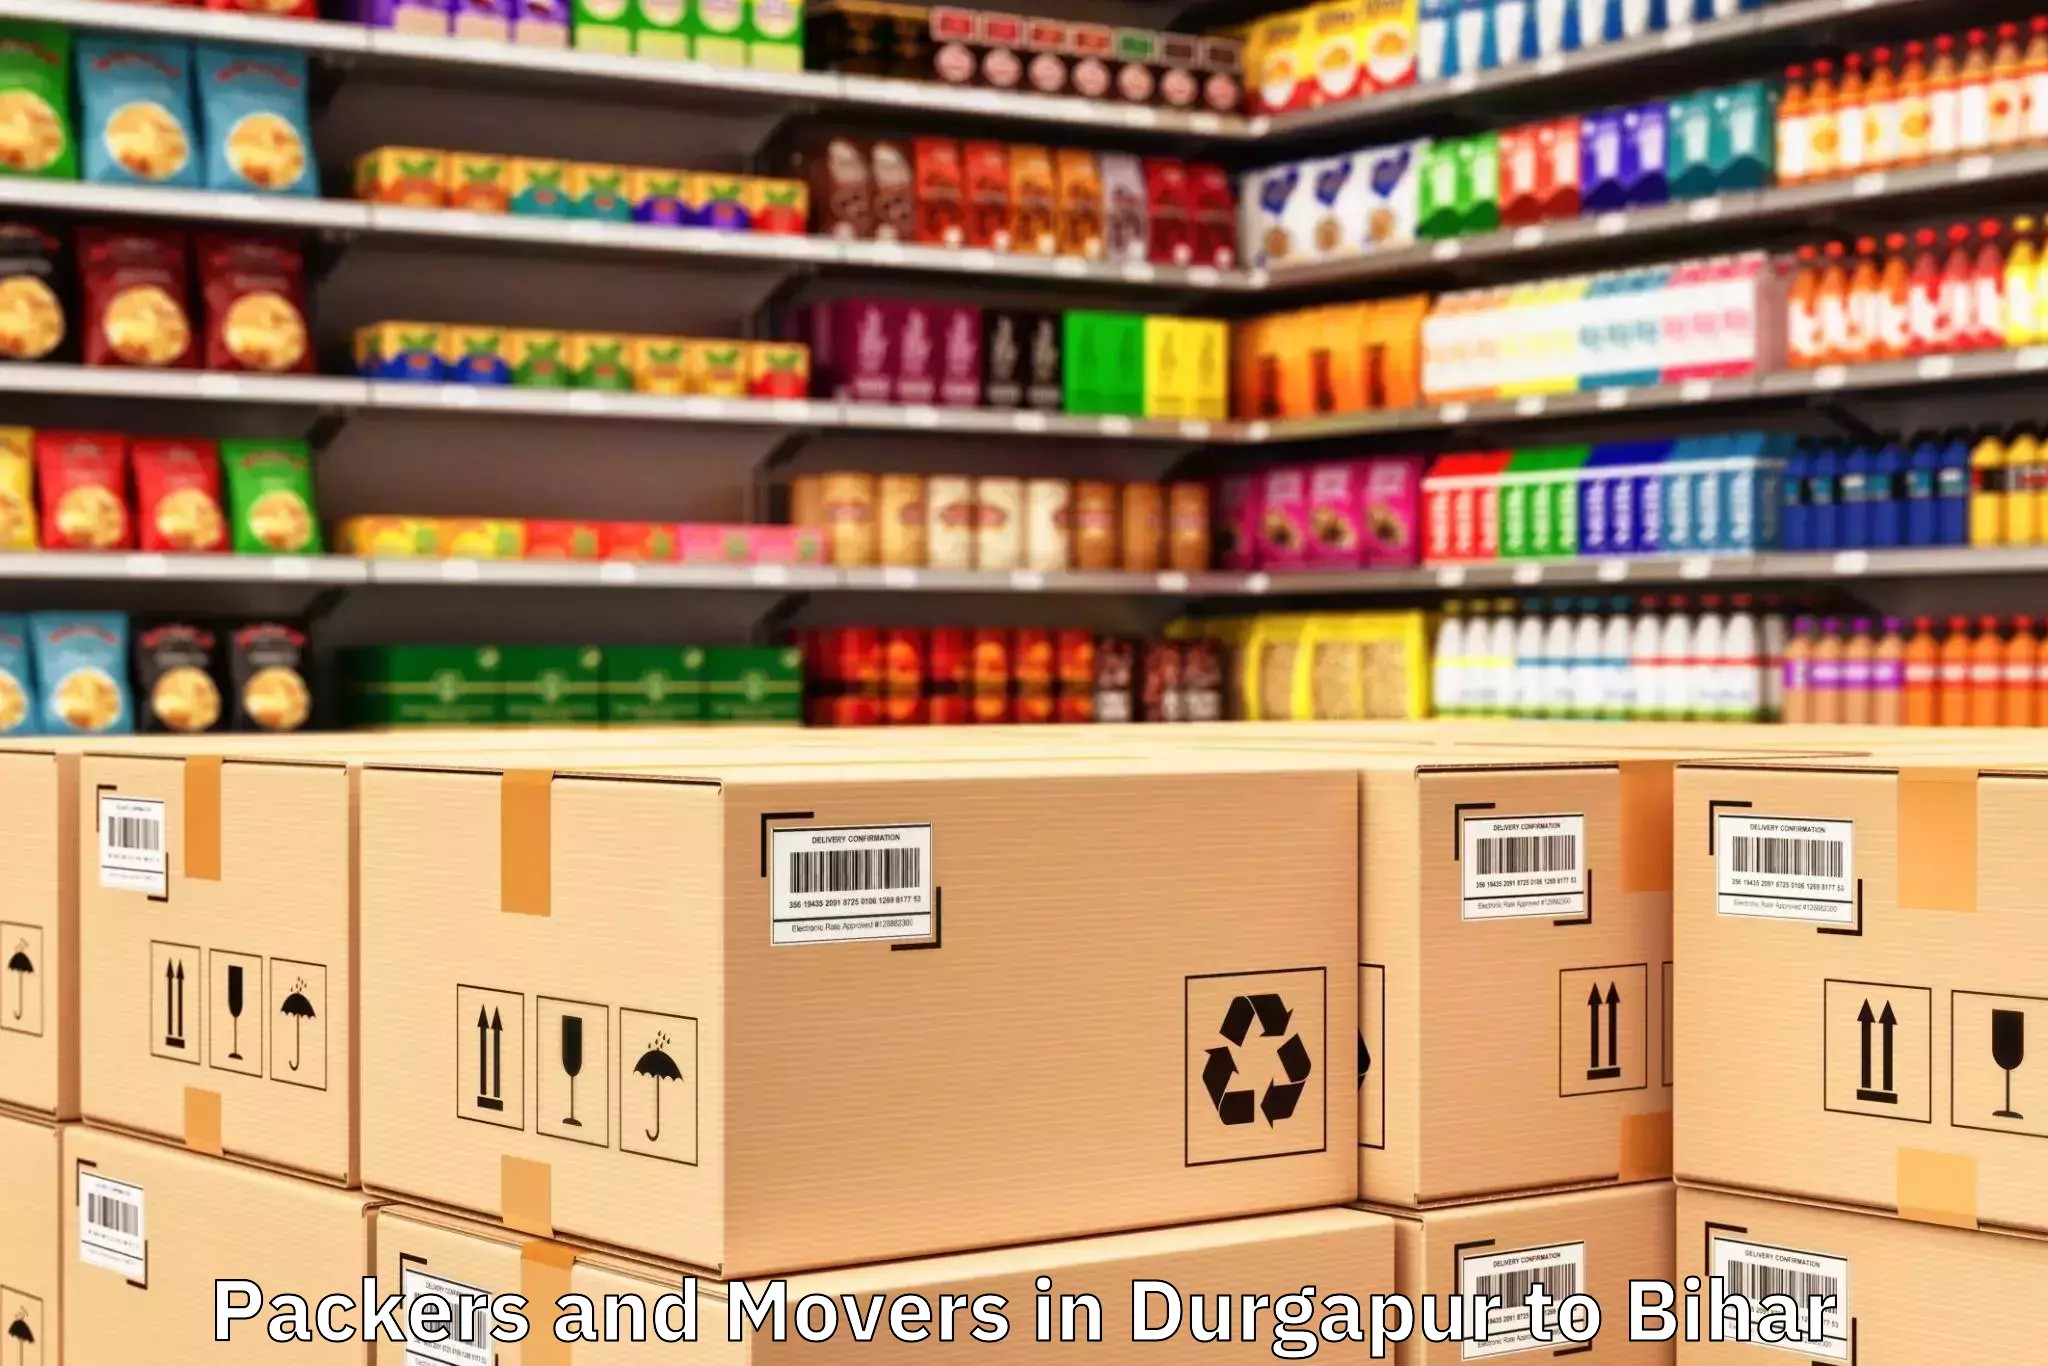 Affordable Durgapur to Barharia Packers And Movers